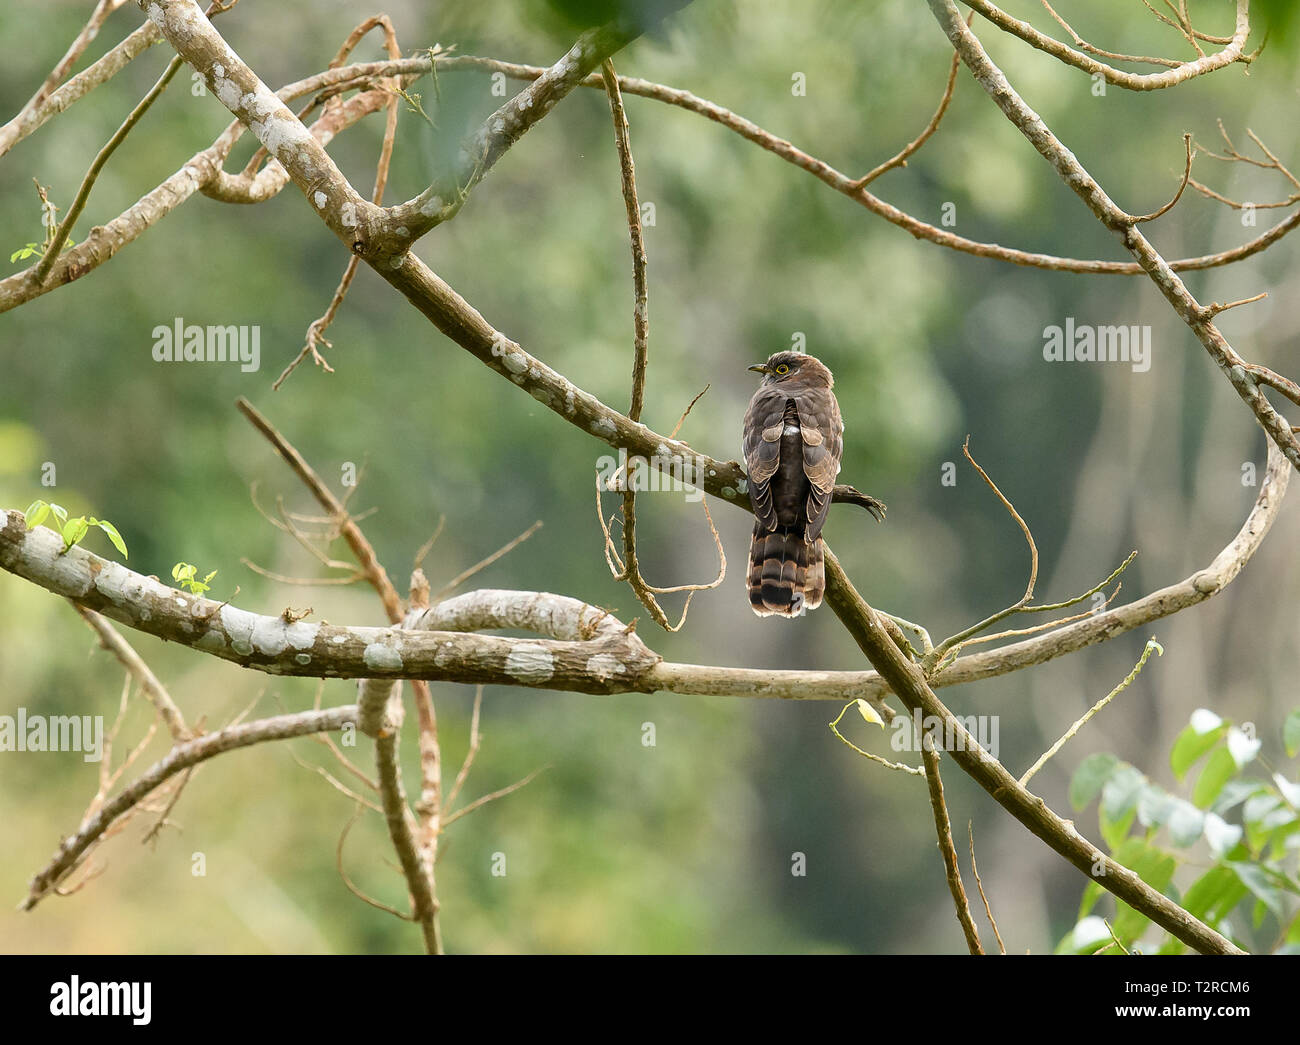 Common cuckoo, Thattekad Bird Sanctuary, also known as Salim Ali Bird Sanctuary, is located in Ernakulam district of Kerala India. Stock Photo